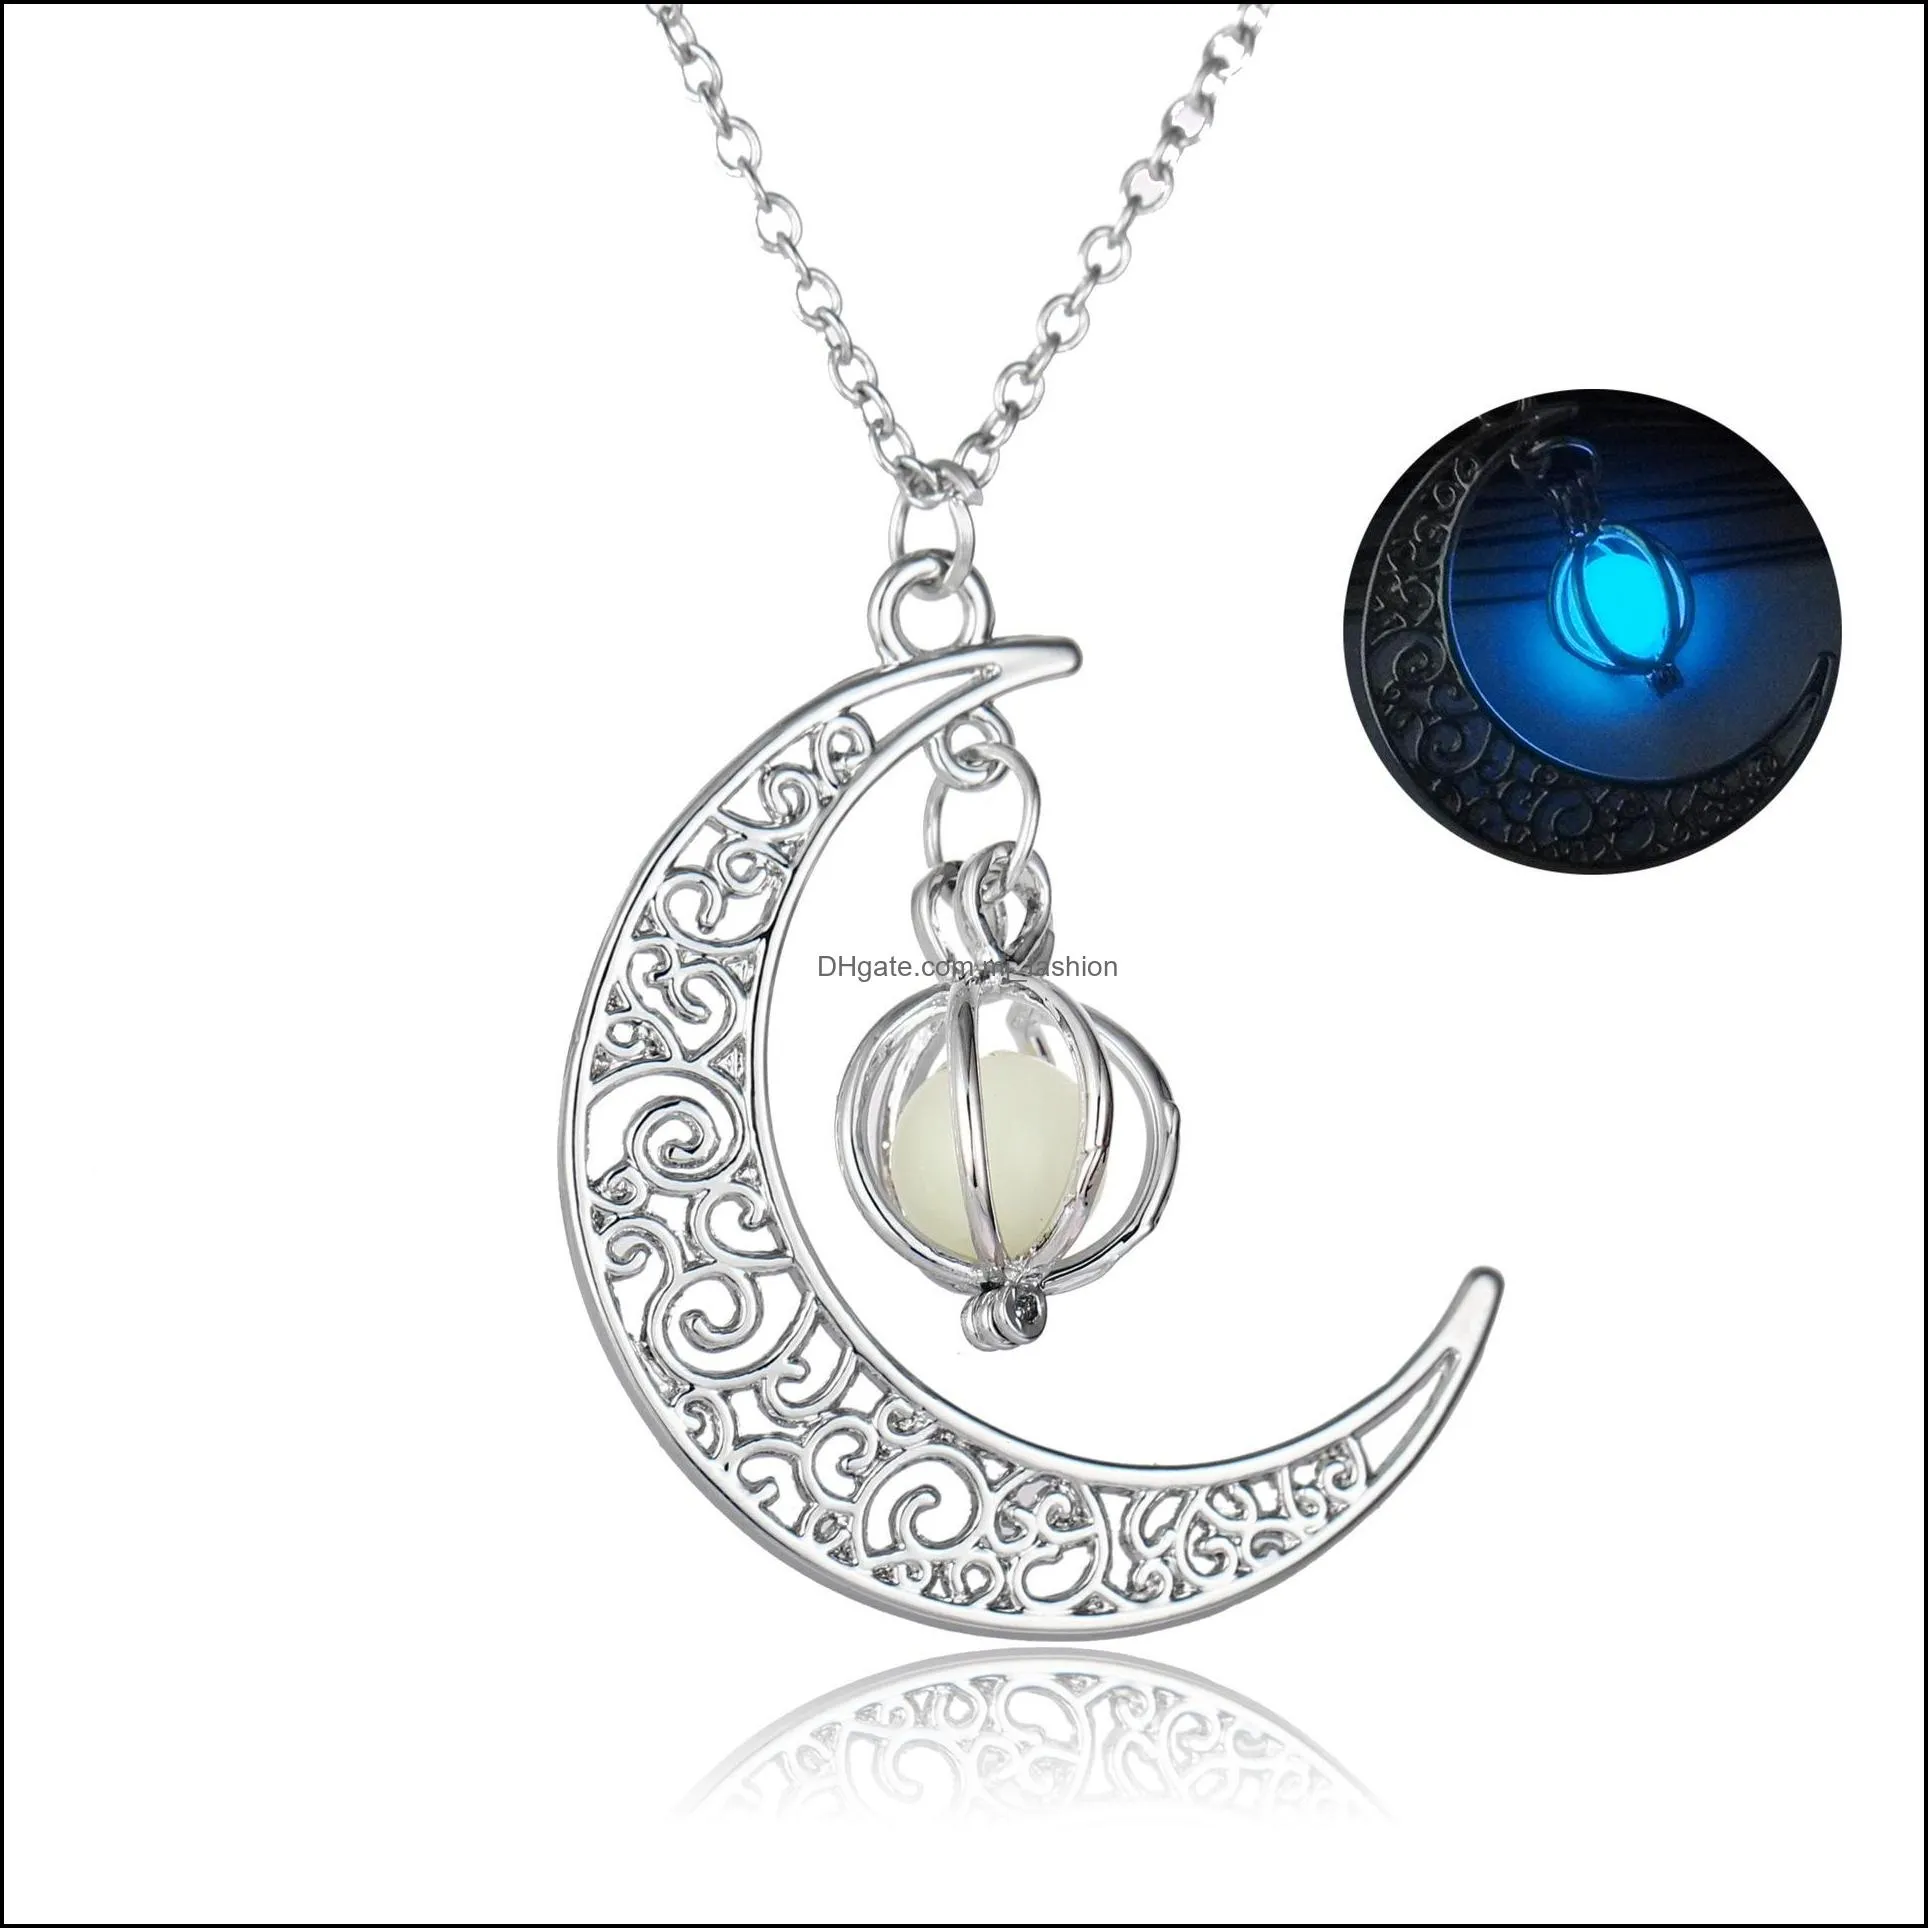 2017 essentials oil diffuser necklace glow in the dark aromatherapy floating lockets moon pendant necklaces for women fashion jewelry